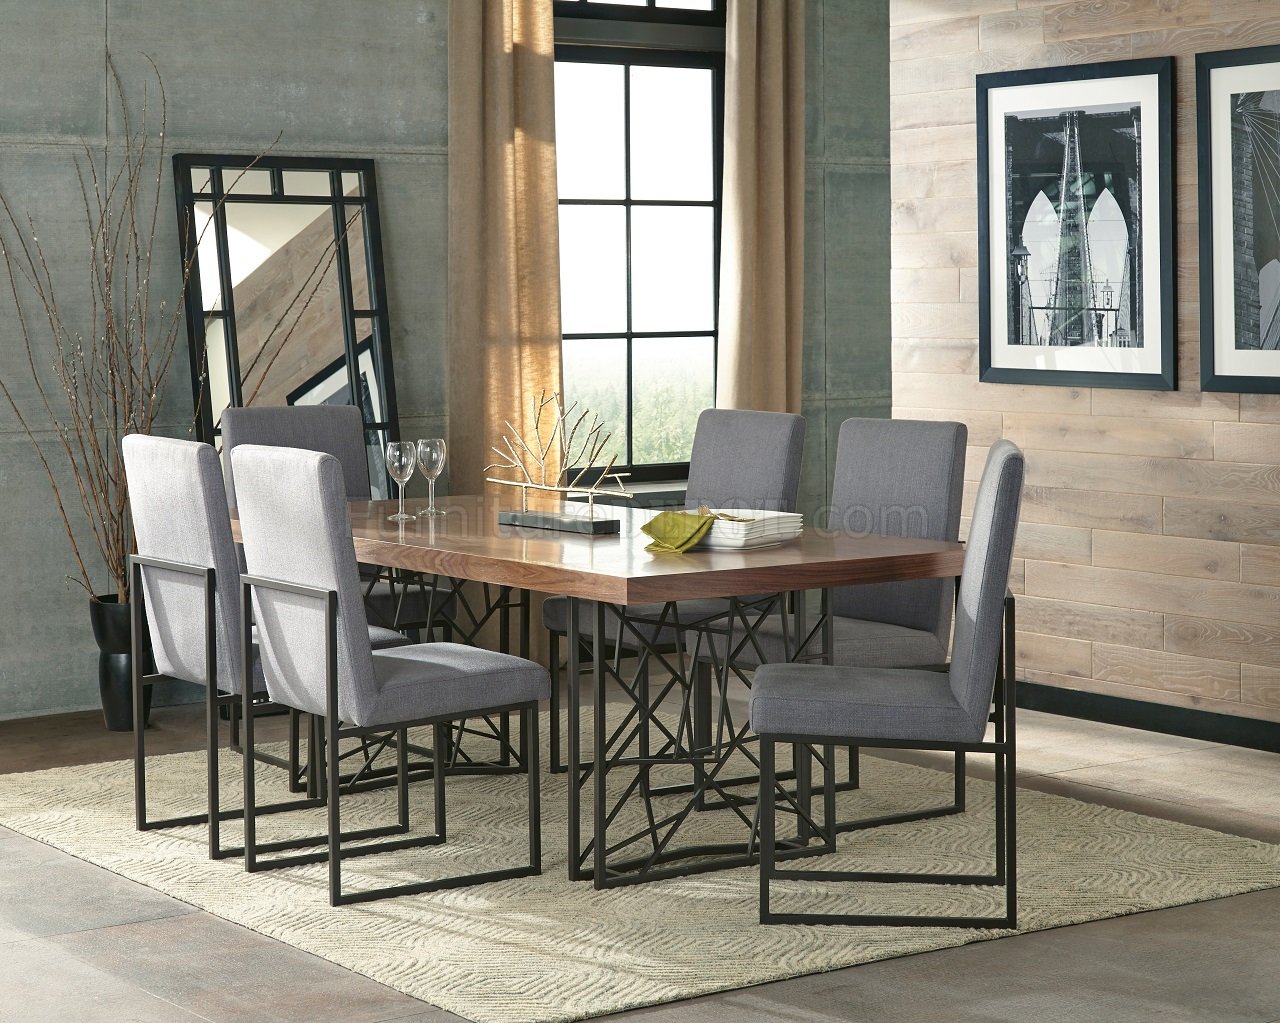 Chancelor 107381 Donny Osmond Collection Dining Table By Coaster